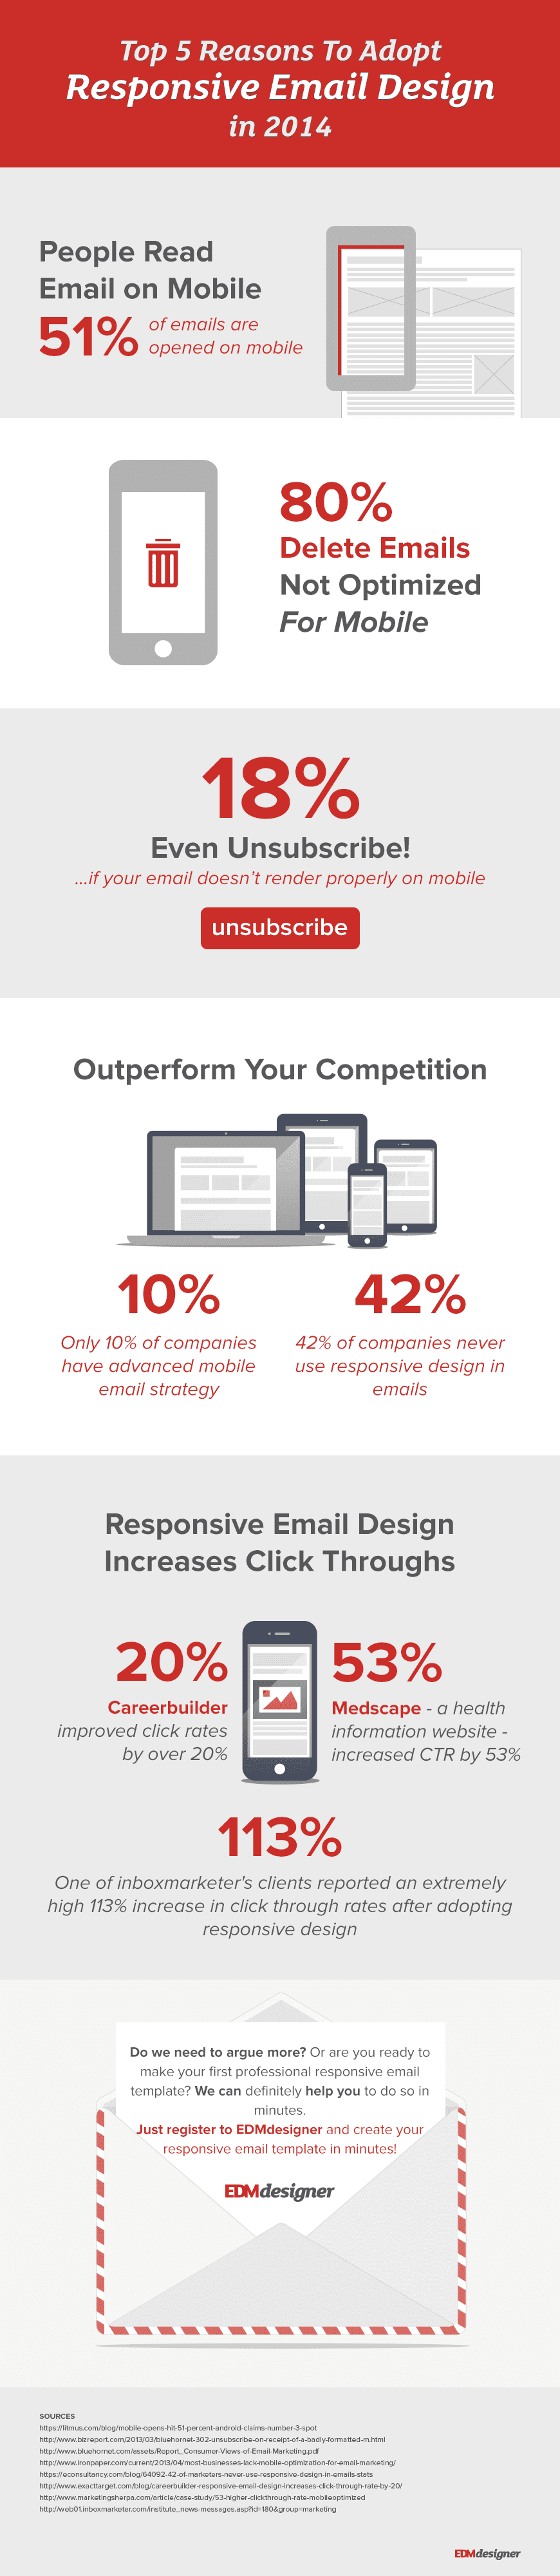 edmdesigner-infographics-top-5-reasons-to-adopt-responsive-email-design-in-2014